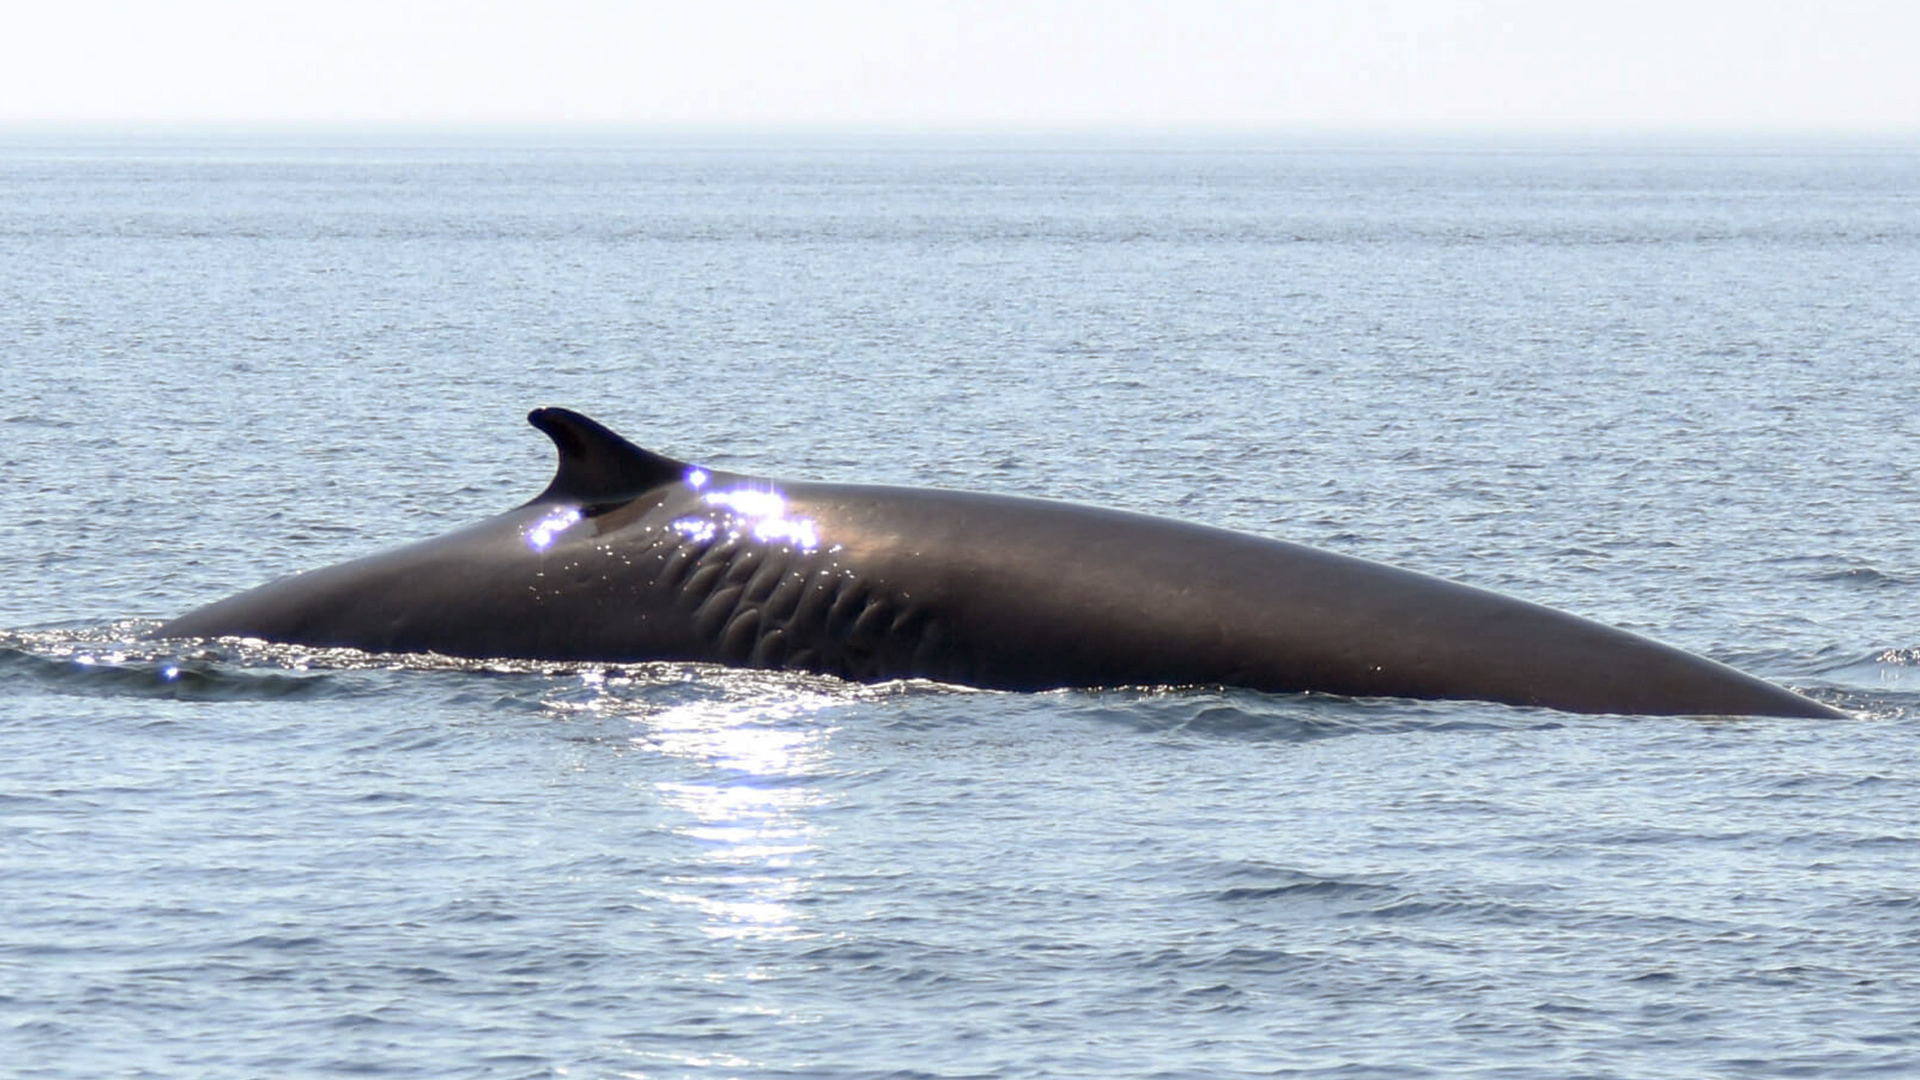 Fin whale back viewed from the right. Below and slightly in front of the dorsal fin, one can see a large scar that resembles a zipper.